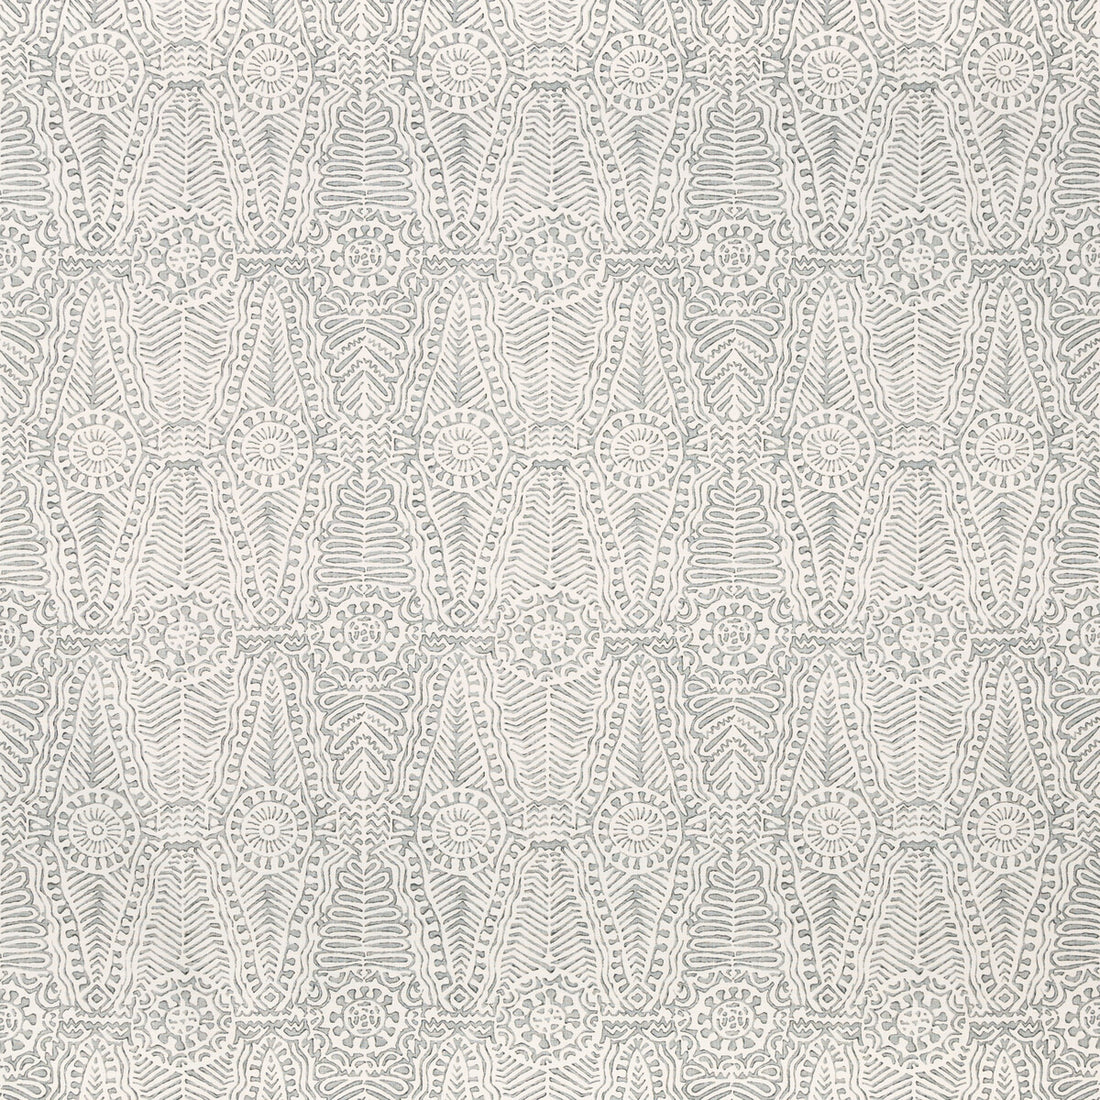 Drayton Print fabric in smoke color - pattern 2020184.21.0 - by Lee Jofa in the Avondale collection